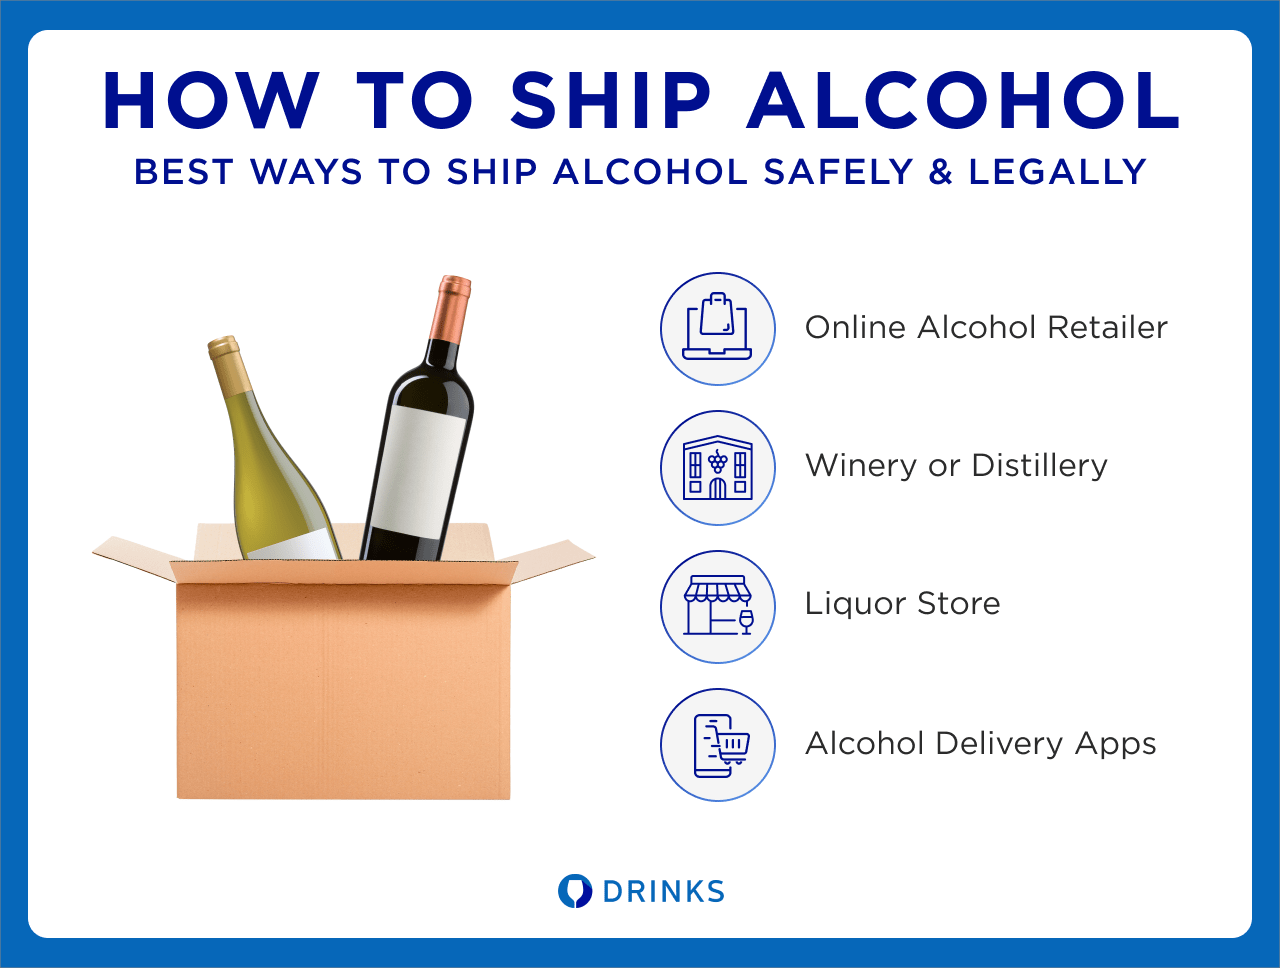 How to Ship Alcohol Infographic | DRINKS